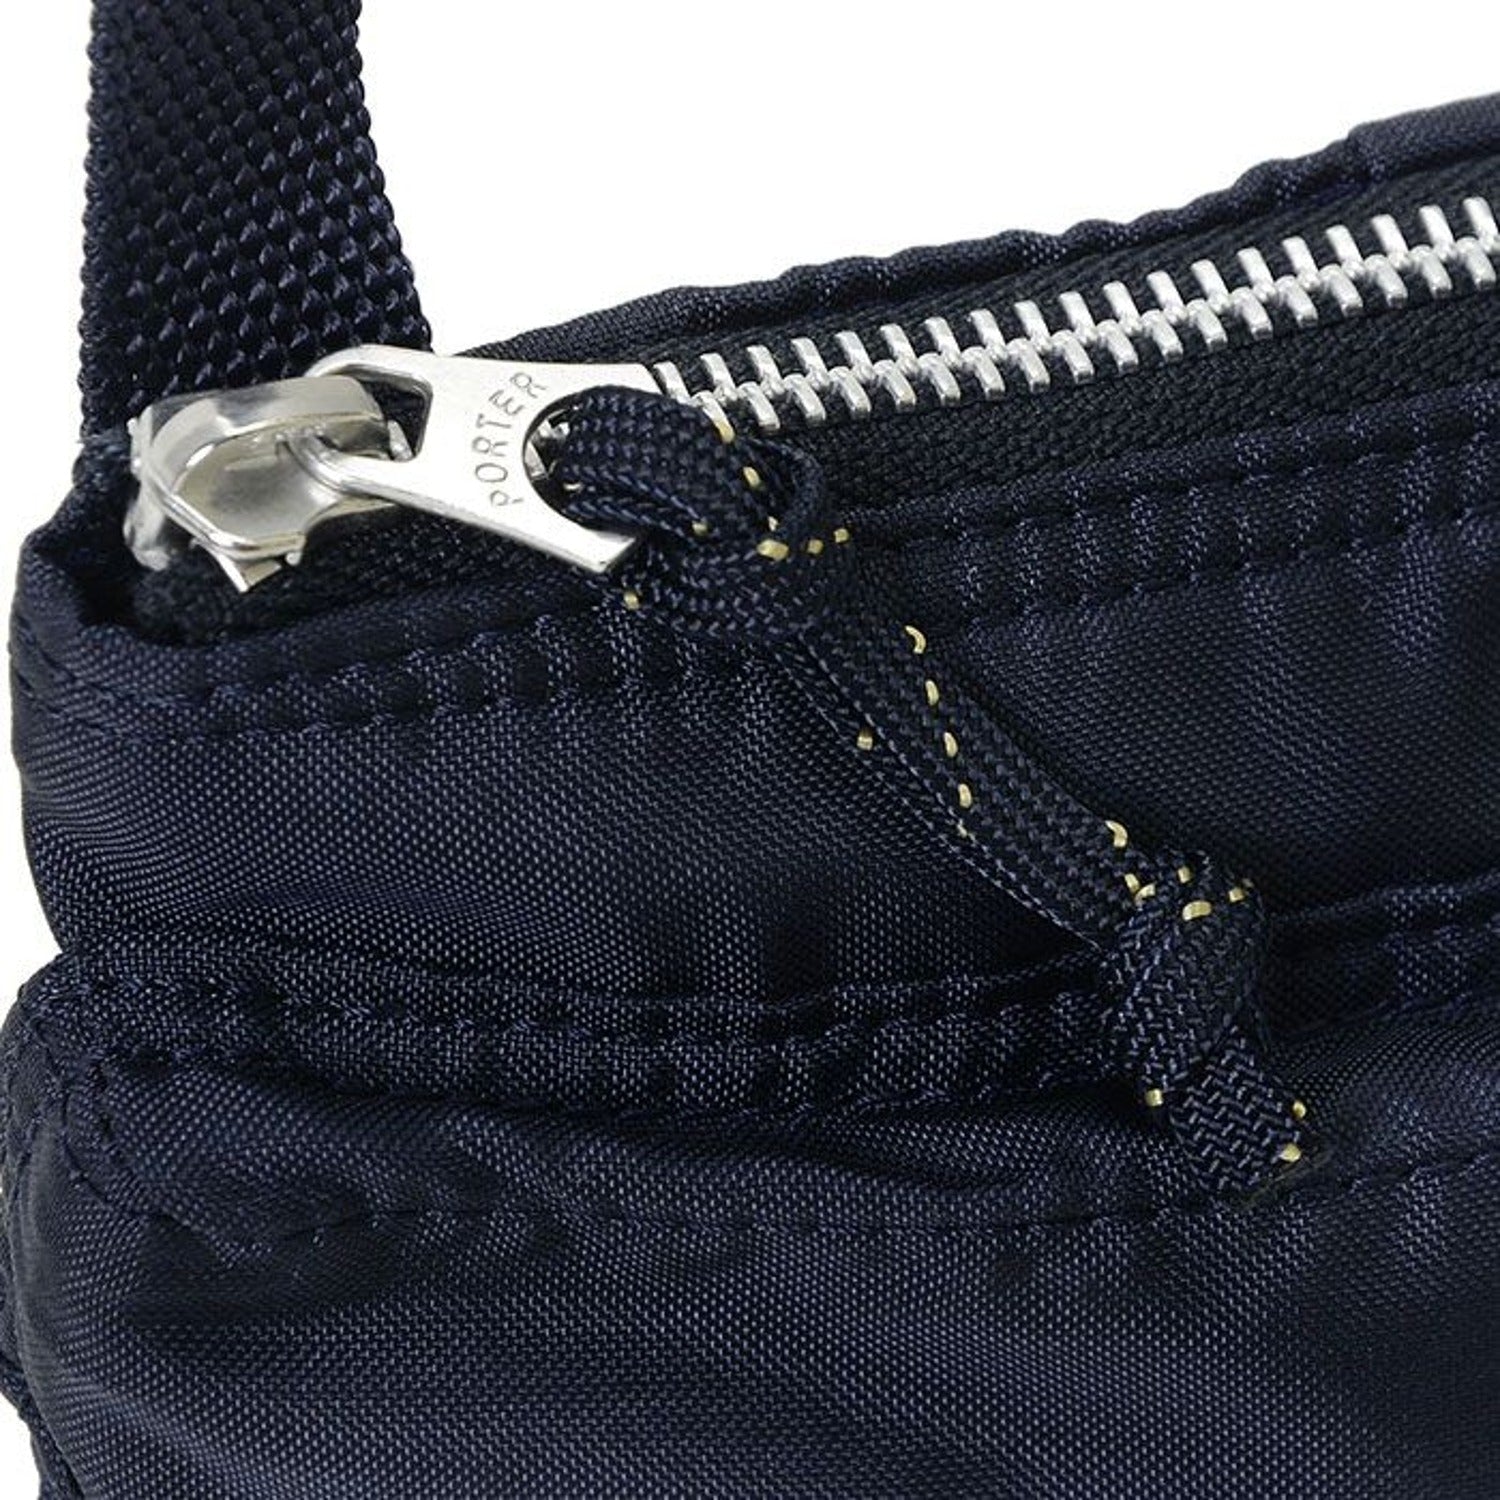 Porter Force Shoulder Pouch Navy - BAGS - Canada